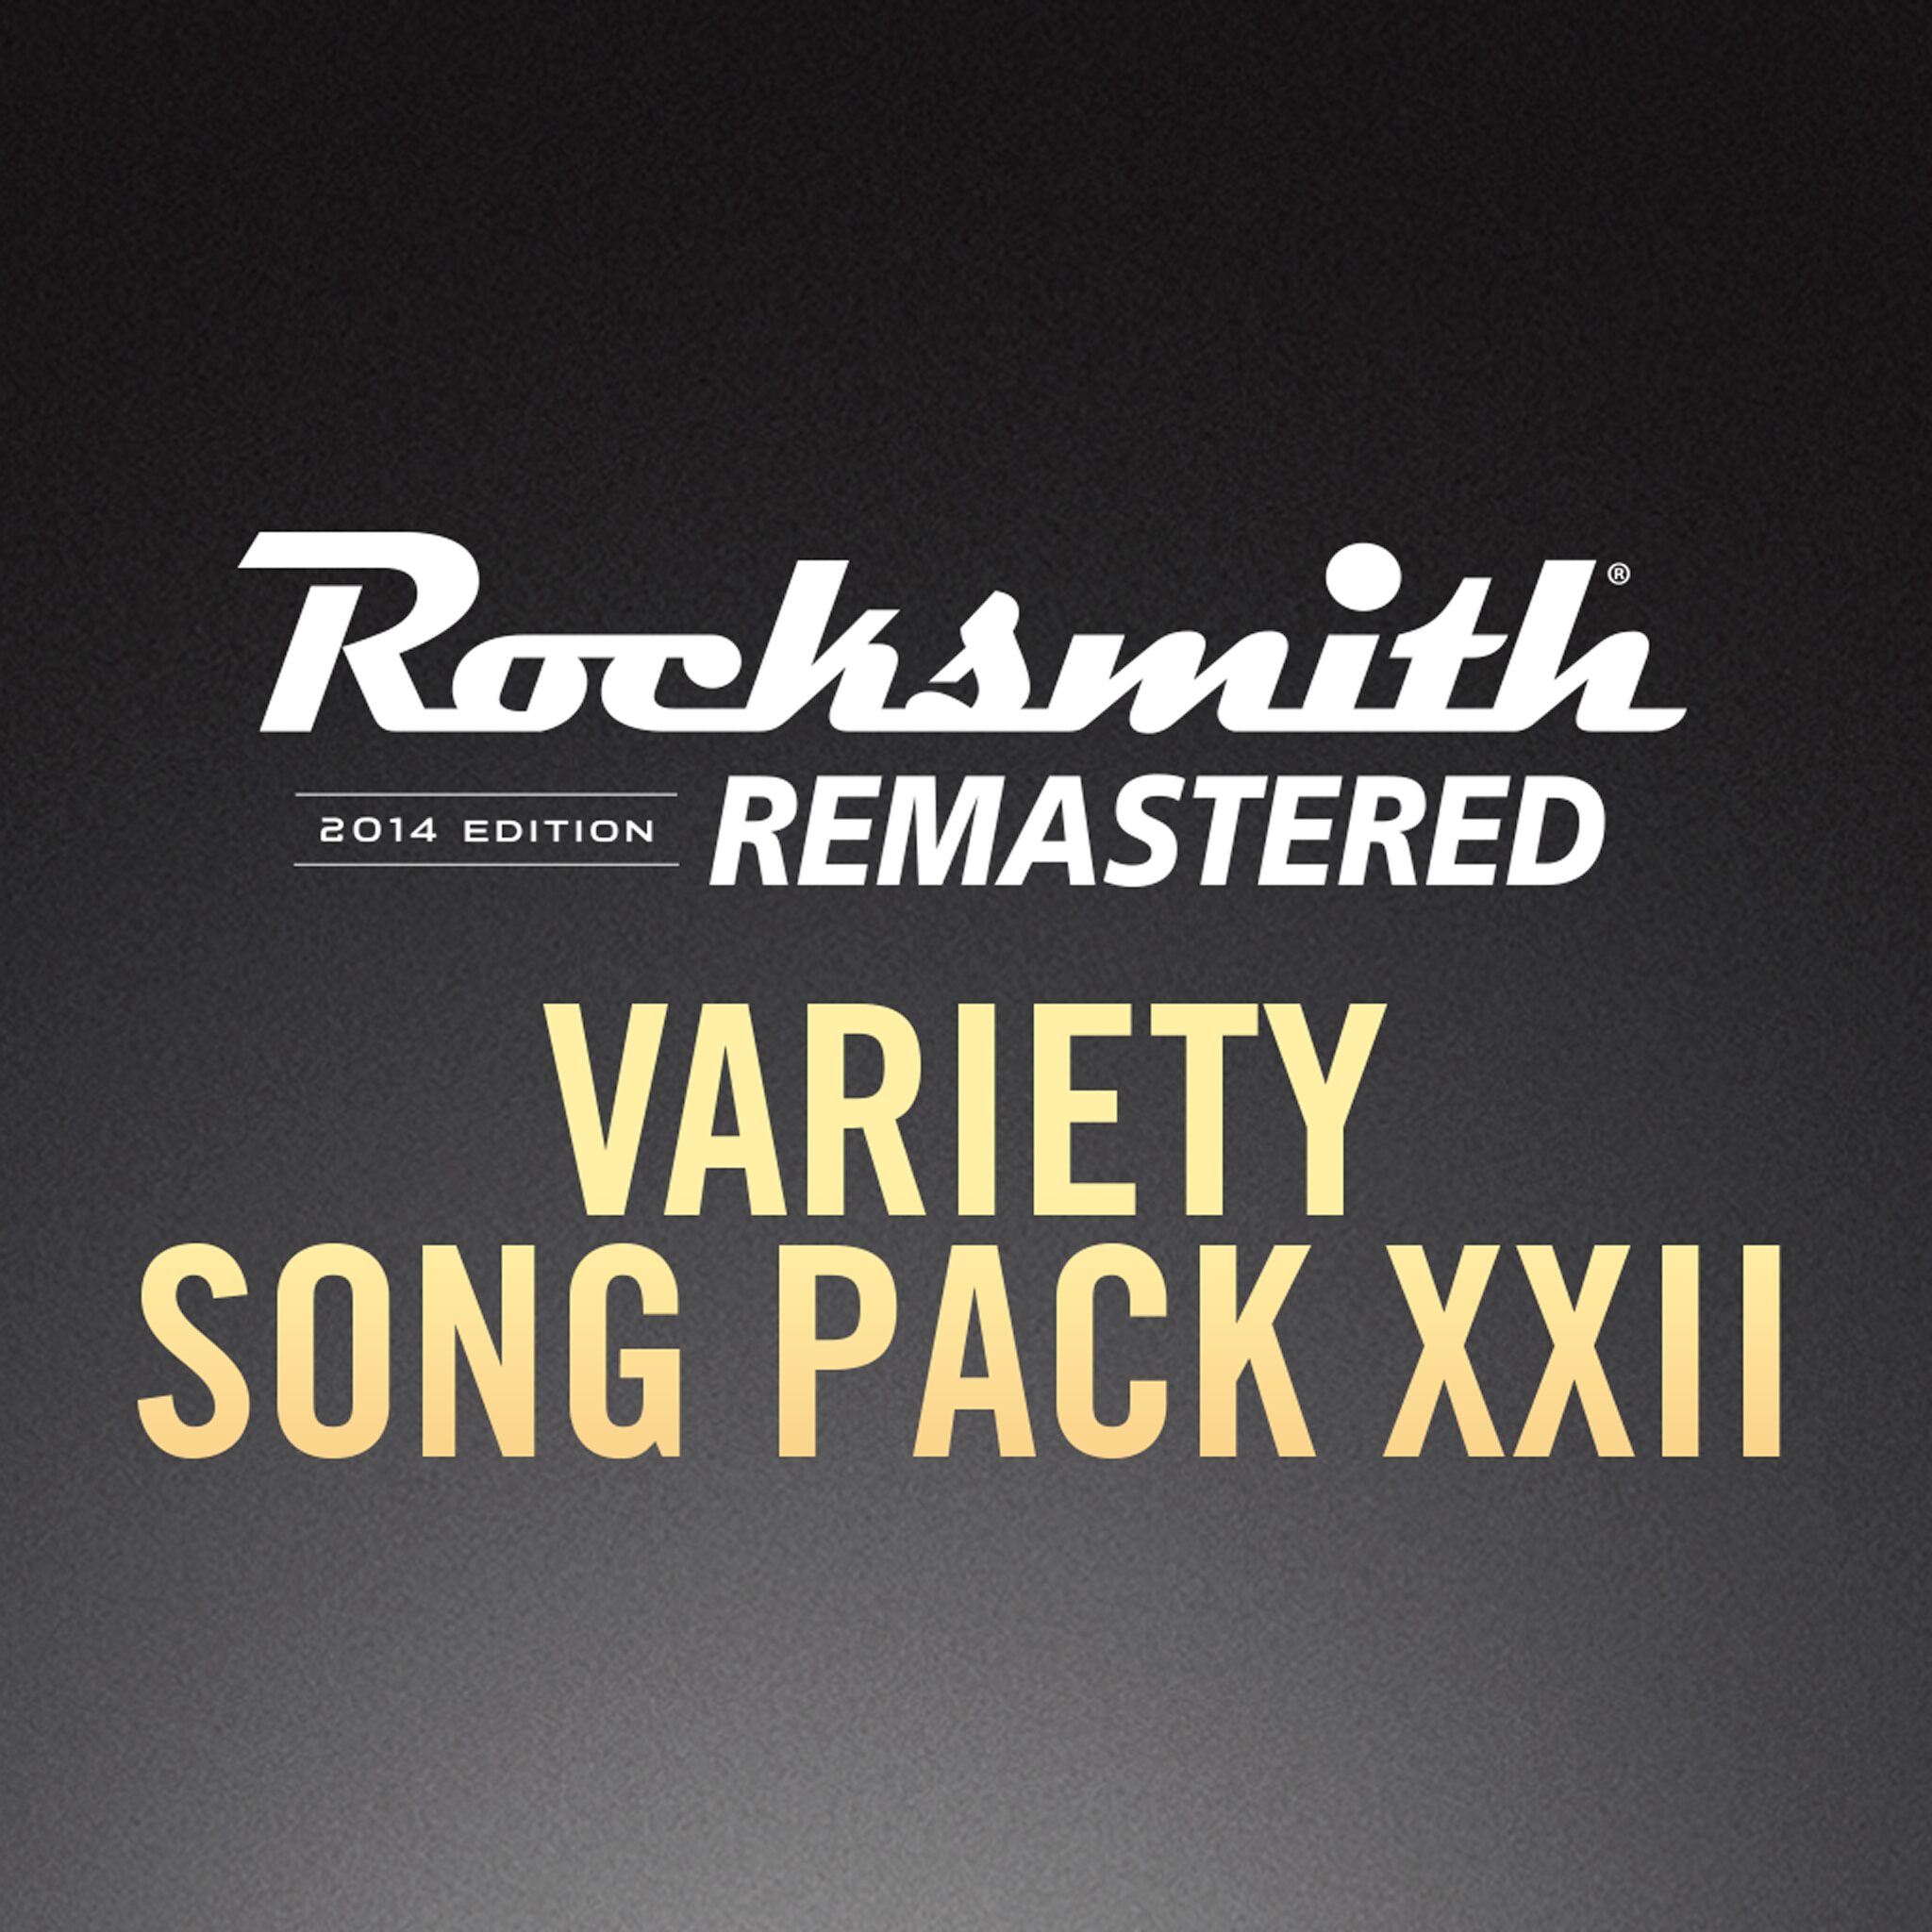 Rocksmith 2014 - Variety Song Pack XXII